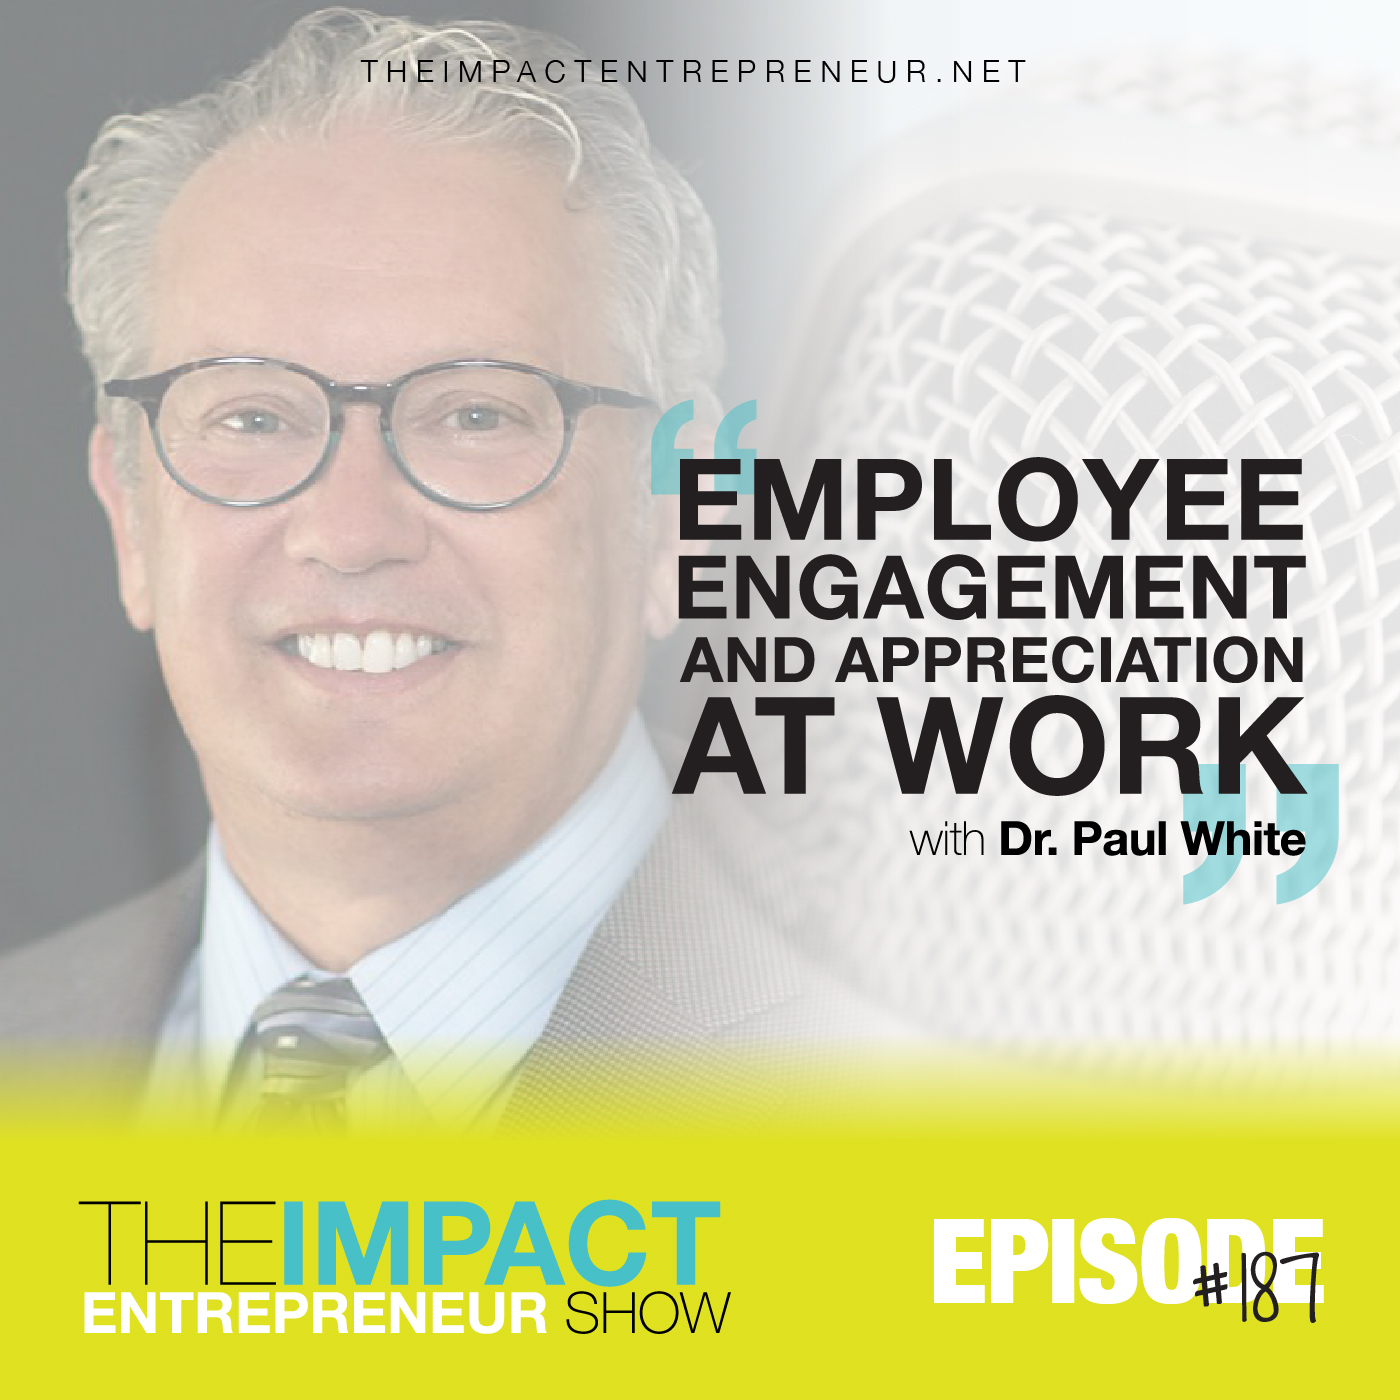 Ep. 187 - Employee Engagement and Appreciation at Work - with Dr. Paul White